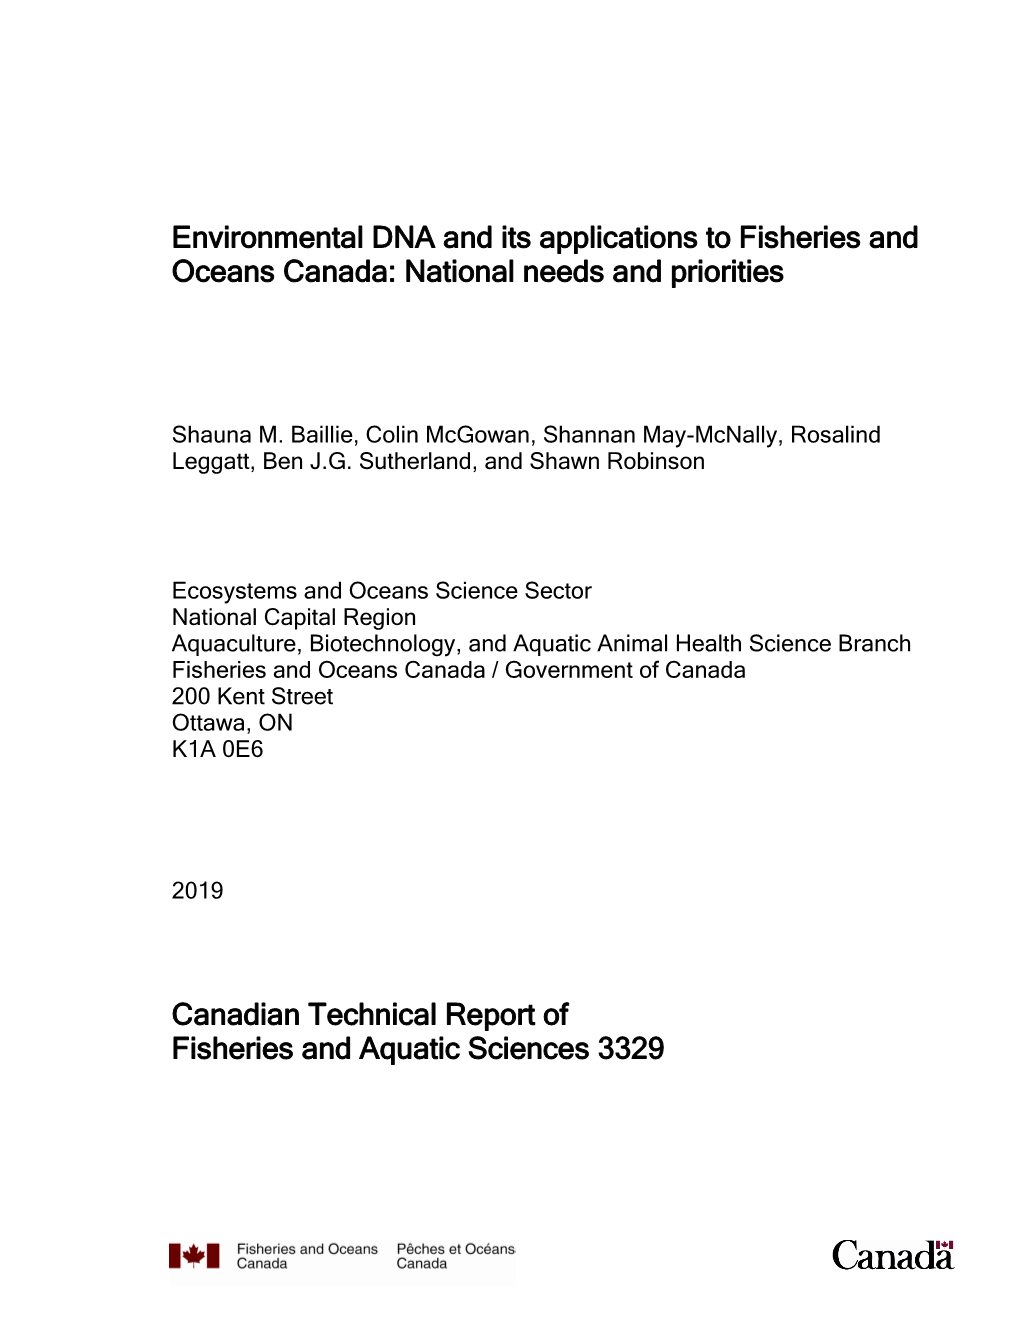 Environmental DNA and Its Applications to Fisheries and Oceans Canada: National Needs and Priorities